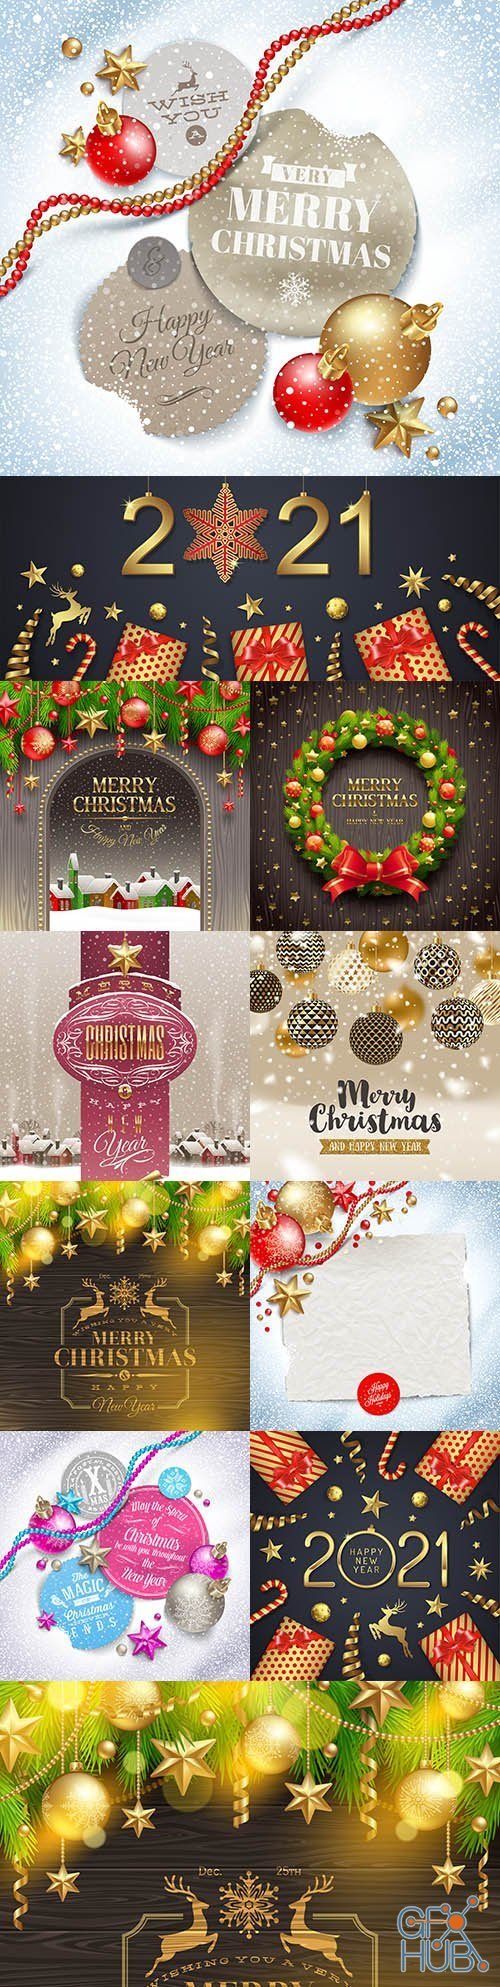 Christmas card decorative congratulations on New Year 2021